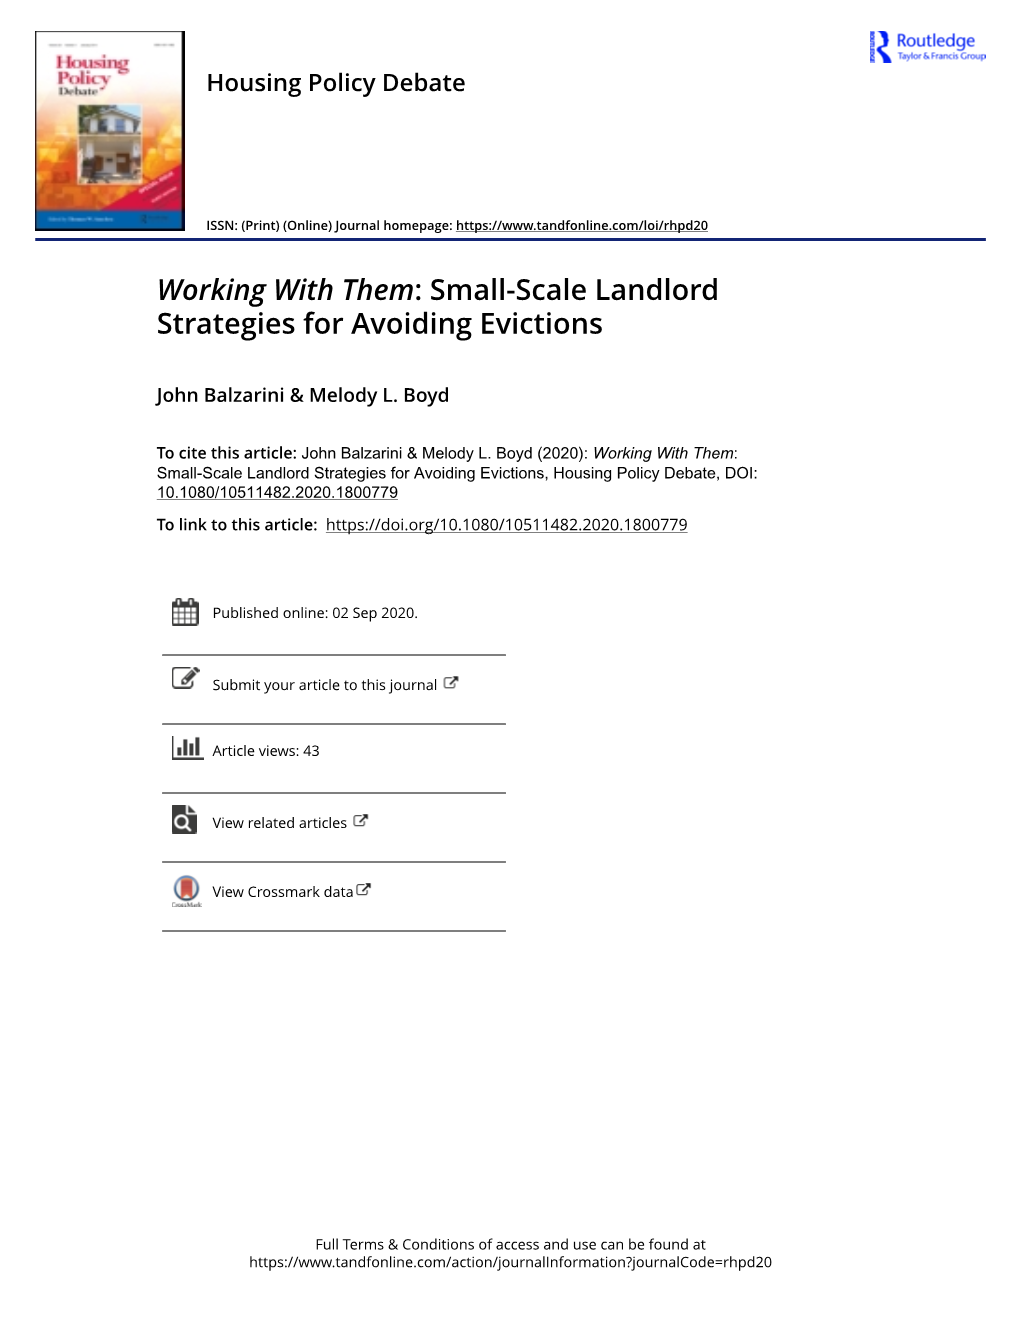 Working with Them: Small-Scale Landlord Strategies for Avoiding Evictions